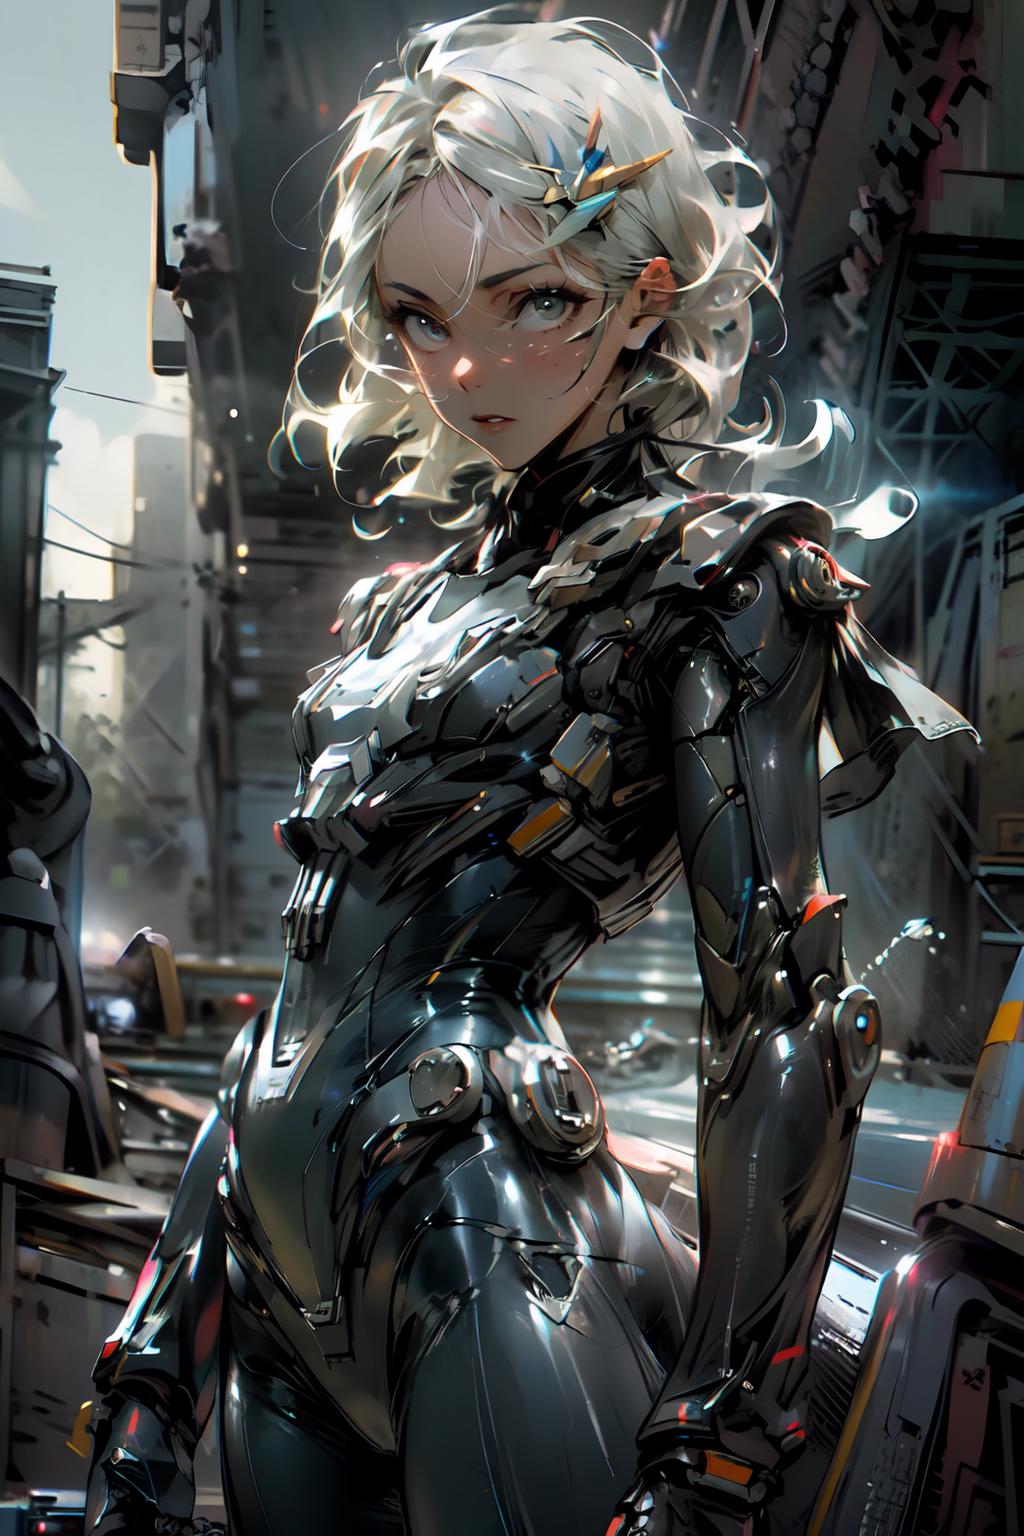 Artistic Illustration of a Woman in a Silver and Black Power Suit.